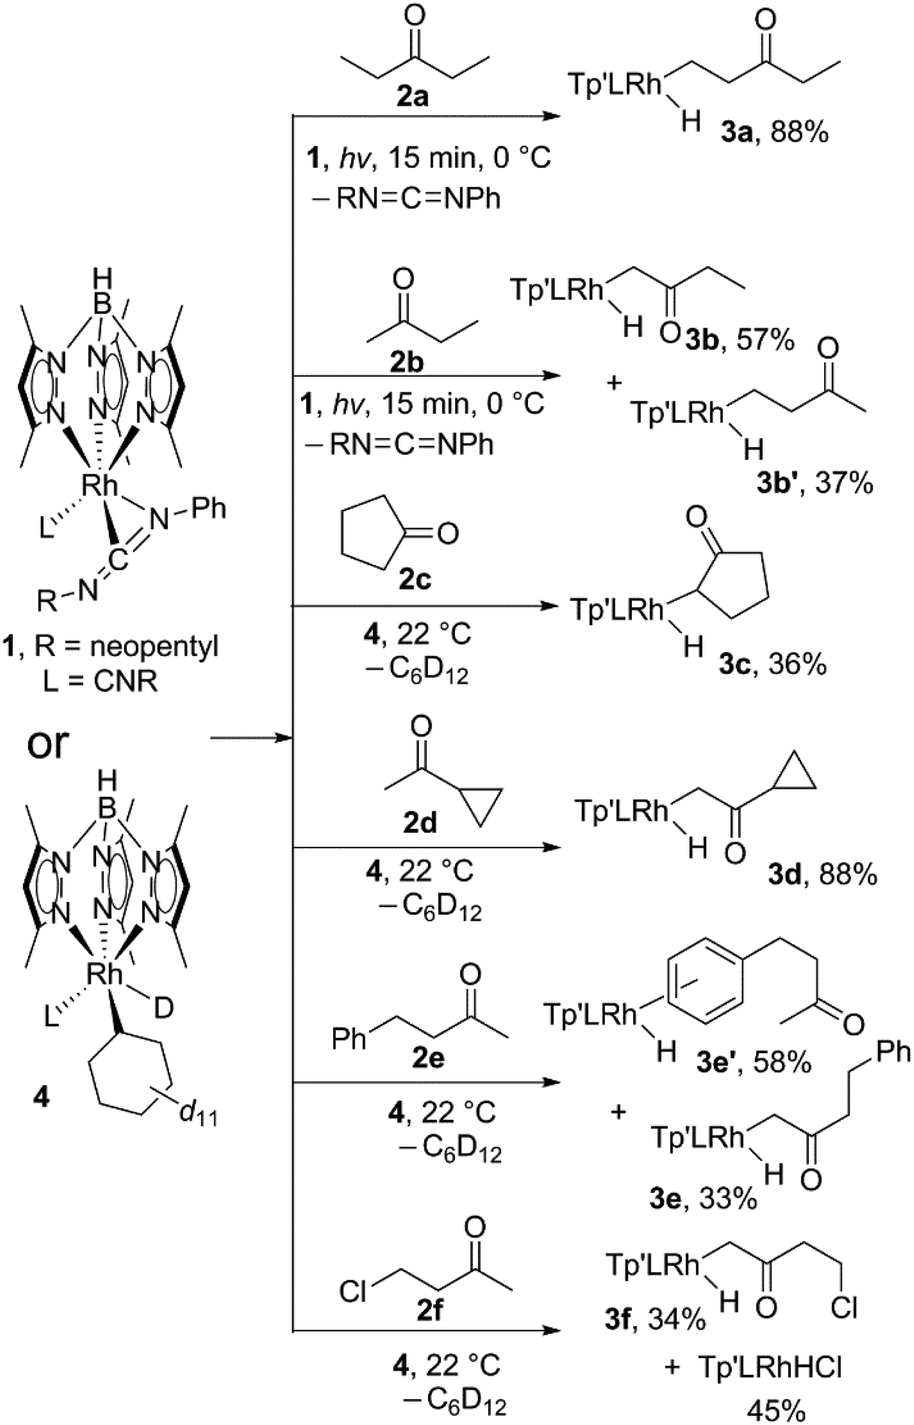 Photolysis Of Tp Rh Cnneopentyl Phncnneopentyl In The Presence Of Ketones And Esters Kinetic And Thermodynamic Selectivity For Activation Of Differ Dalton Transactions Rsc Publishing Doi 10 1039 C9dtf